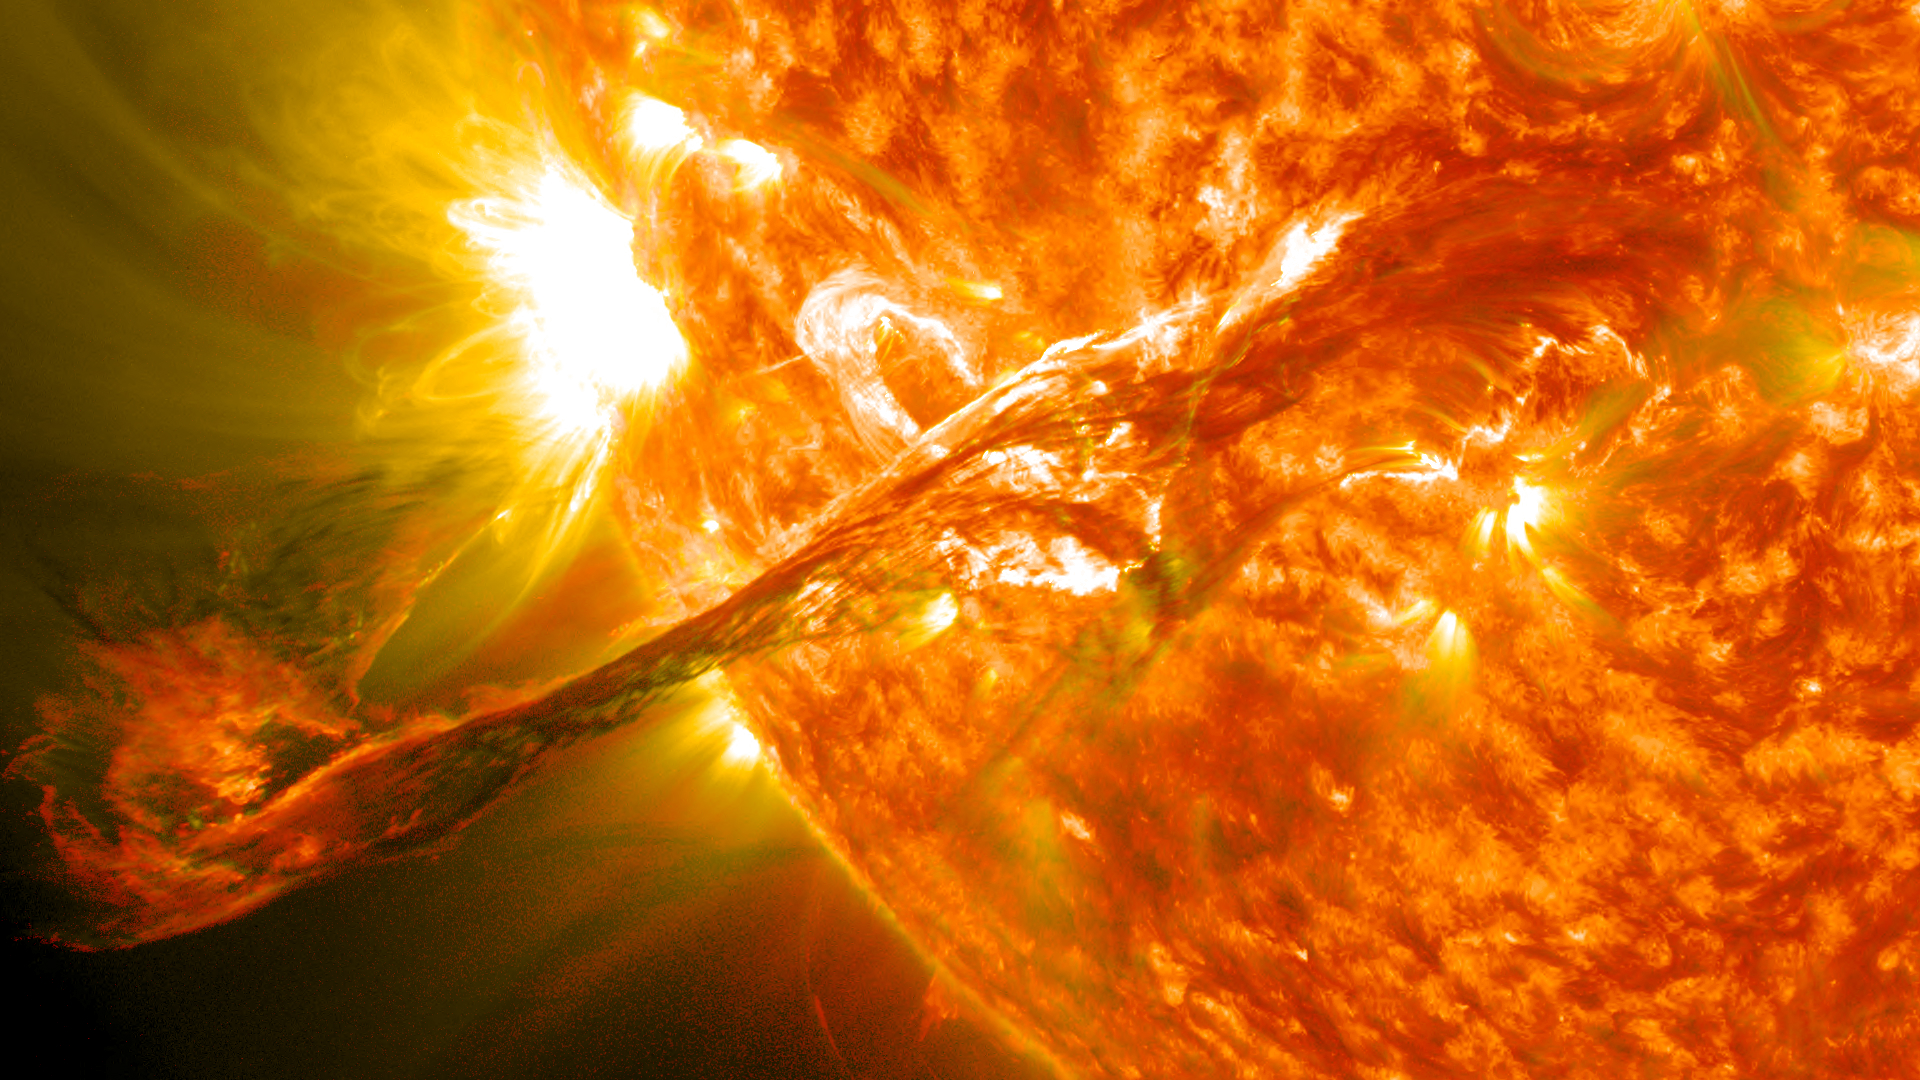 File:Magnificent CME Erupts on the Sun - August 31.jpg - Wikipedia